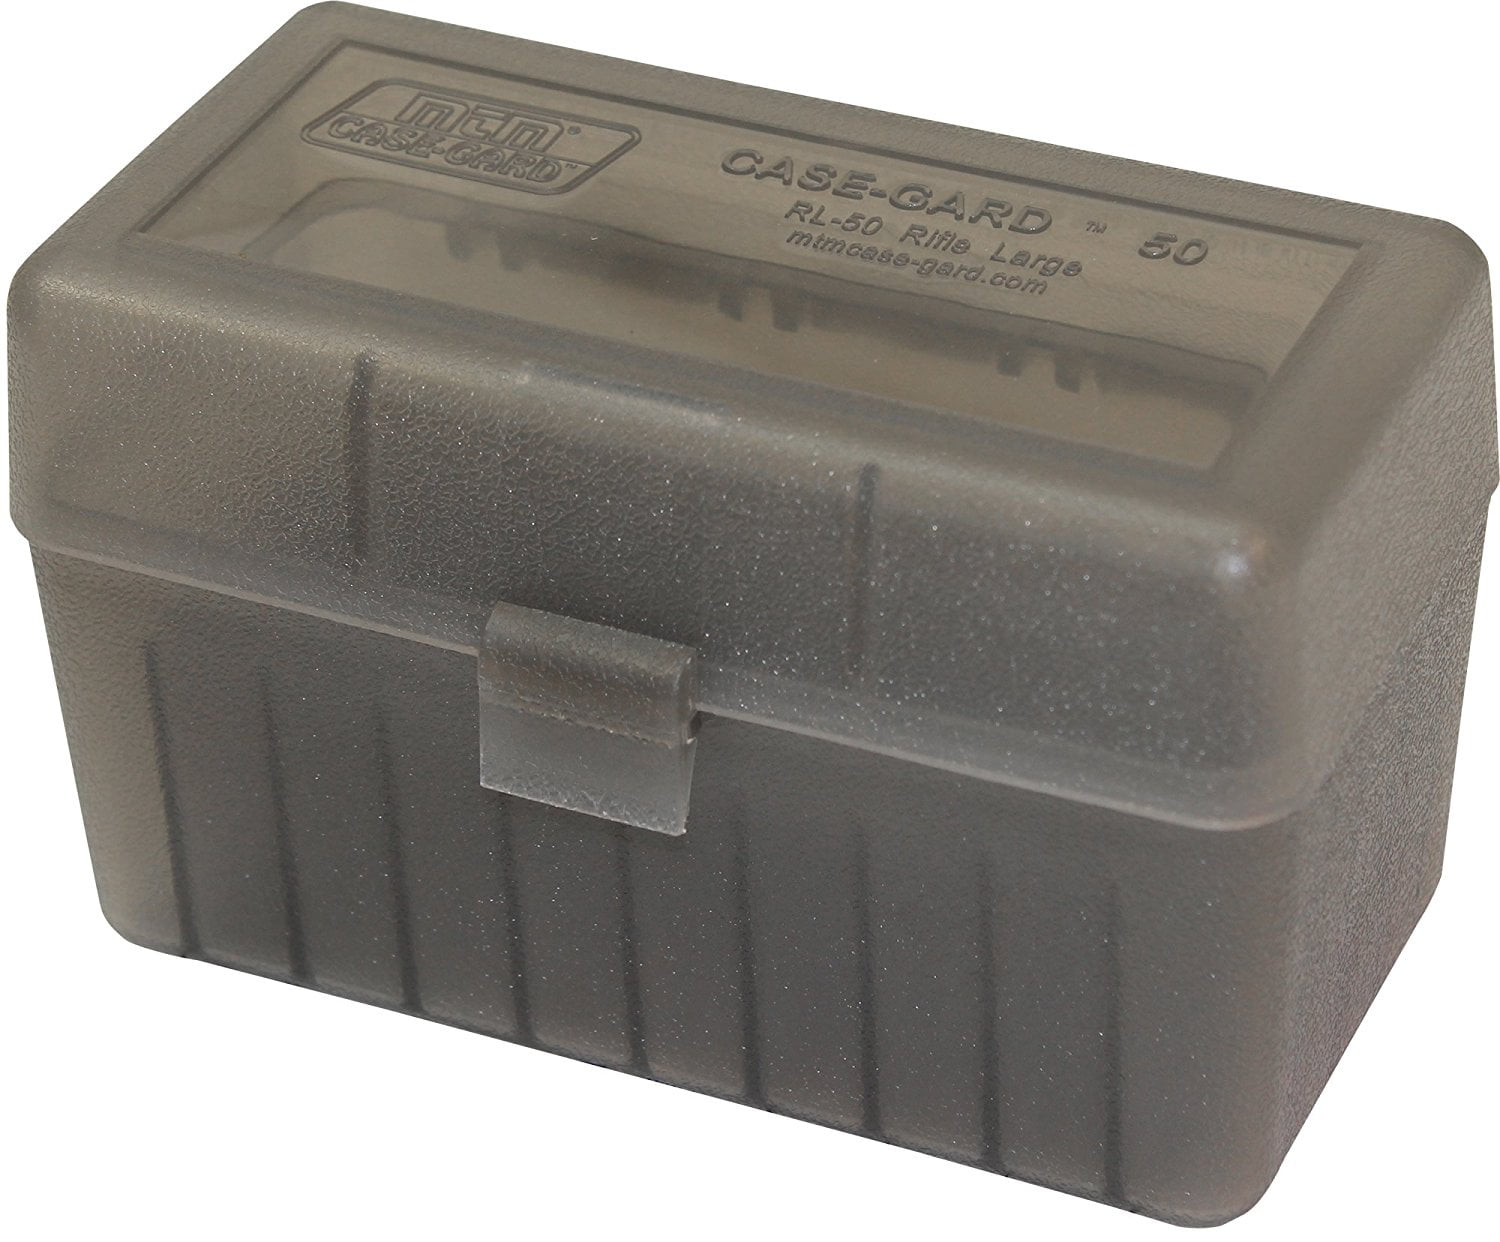 Tactical45 Ammo Storage Crate with 4 Pack Lockable Ammunition Storage Boxes